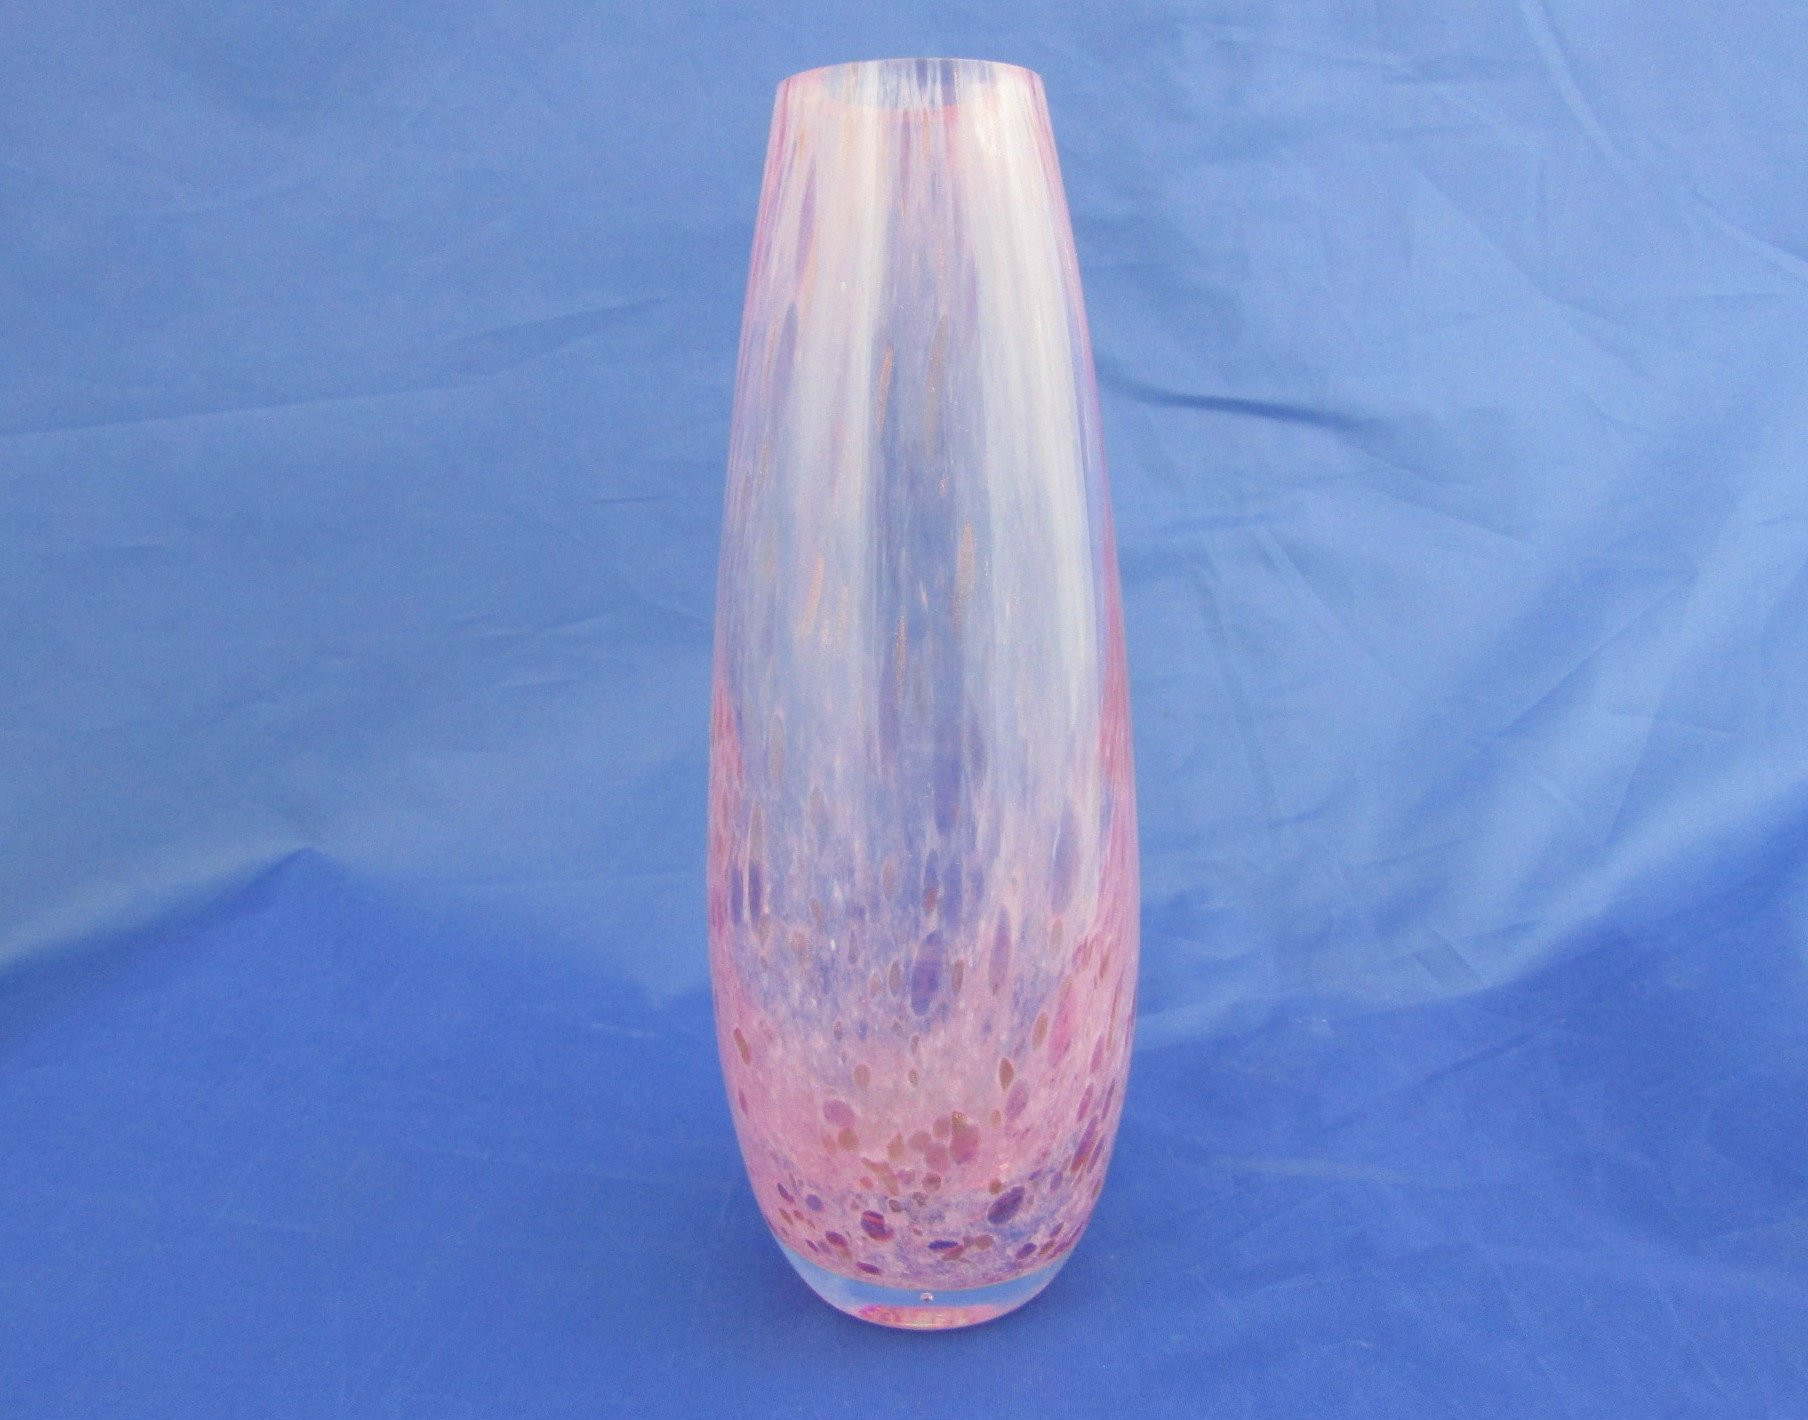 27 Lovable Cheap Glass Vases Near Me 2024 free download cheap glass vases near me of caithness glass vase teardrop shaped vase pink spatter glass etsy with regard to dc29fc294c28ezoom